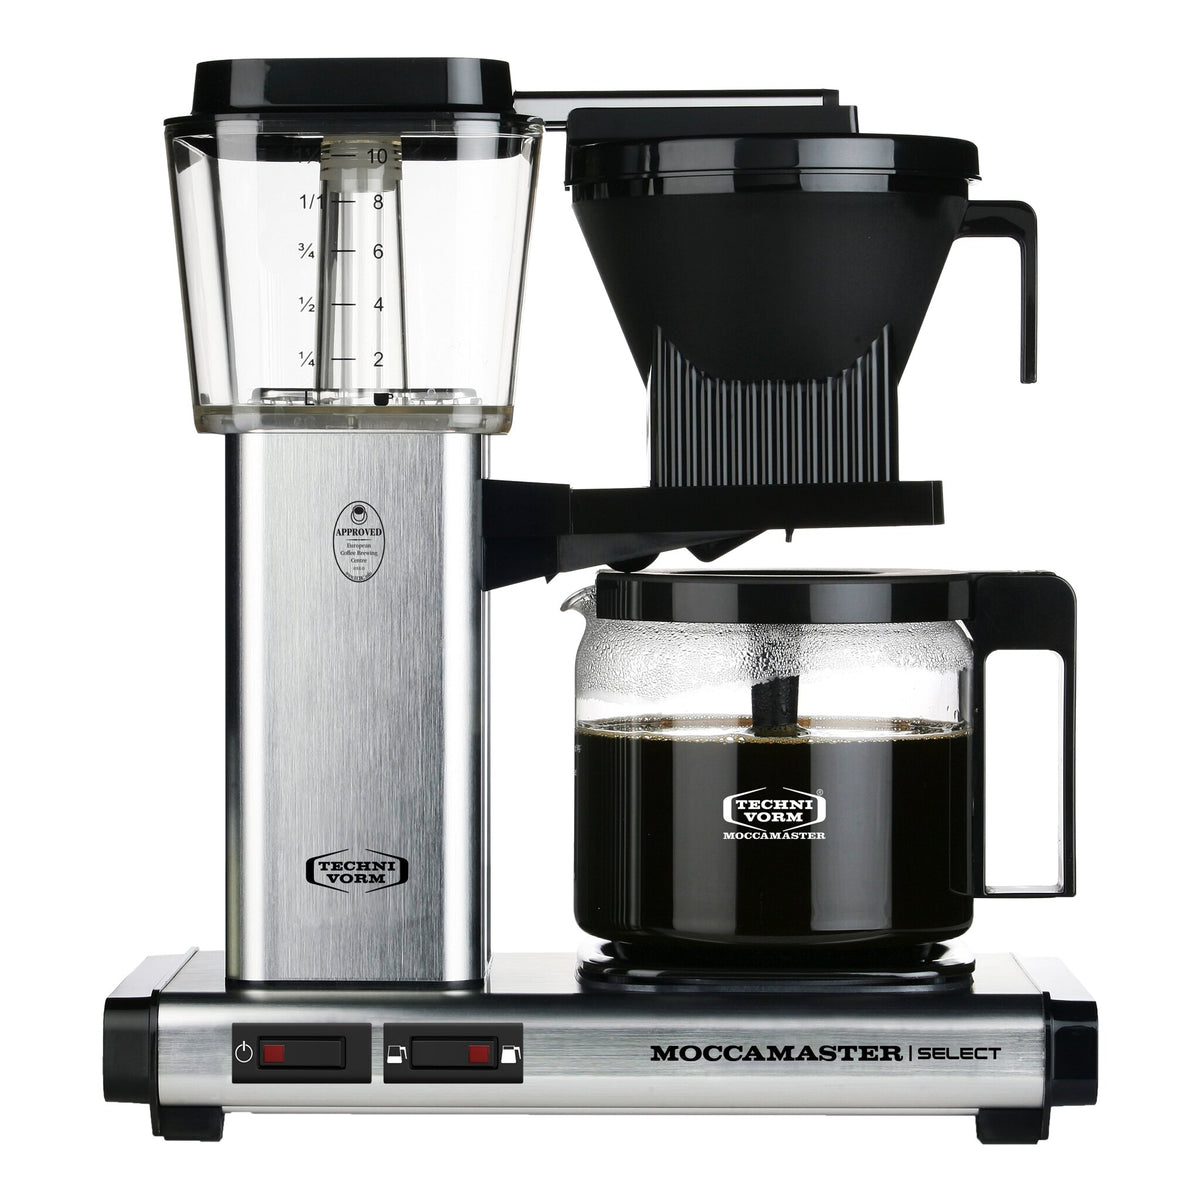 Moccamaster filter coffee Coffee machine – Select KBG CAPTN